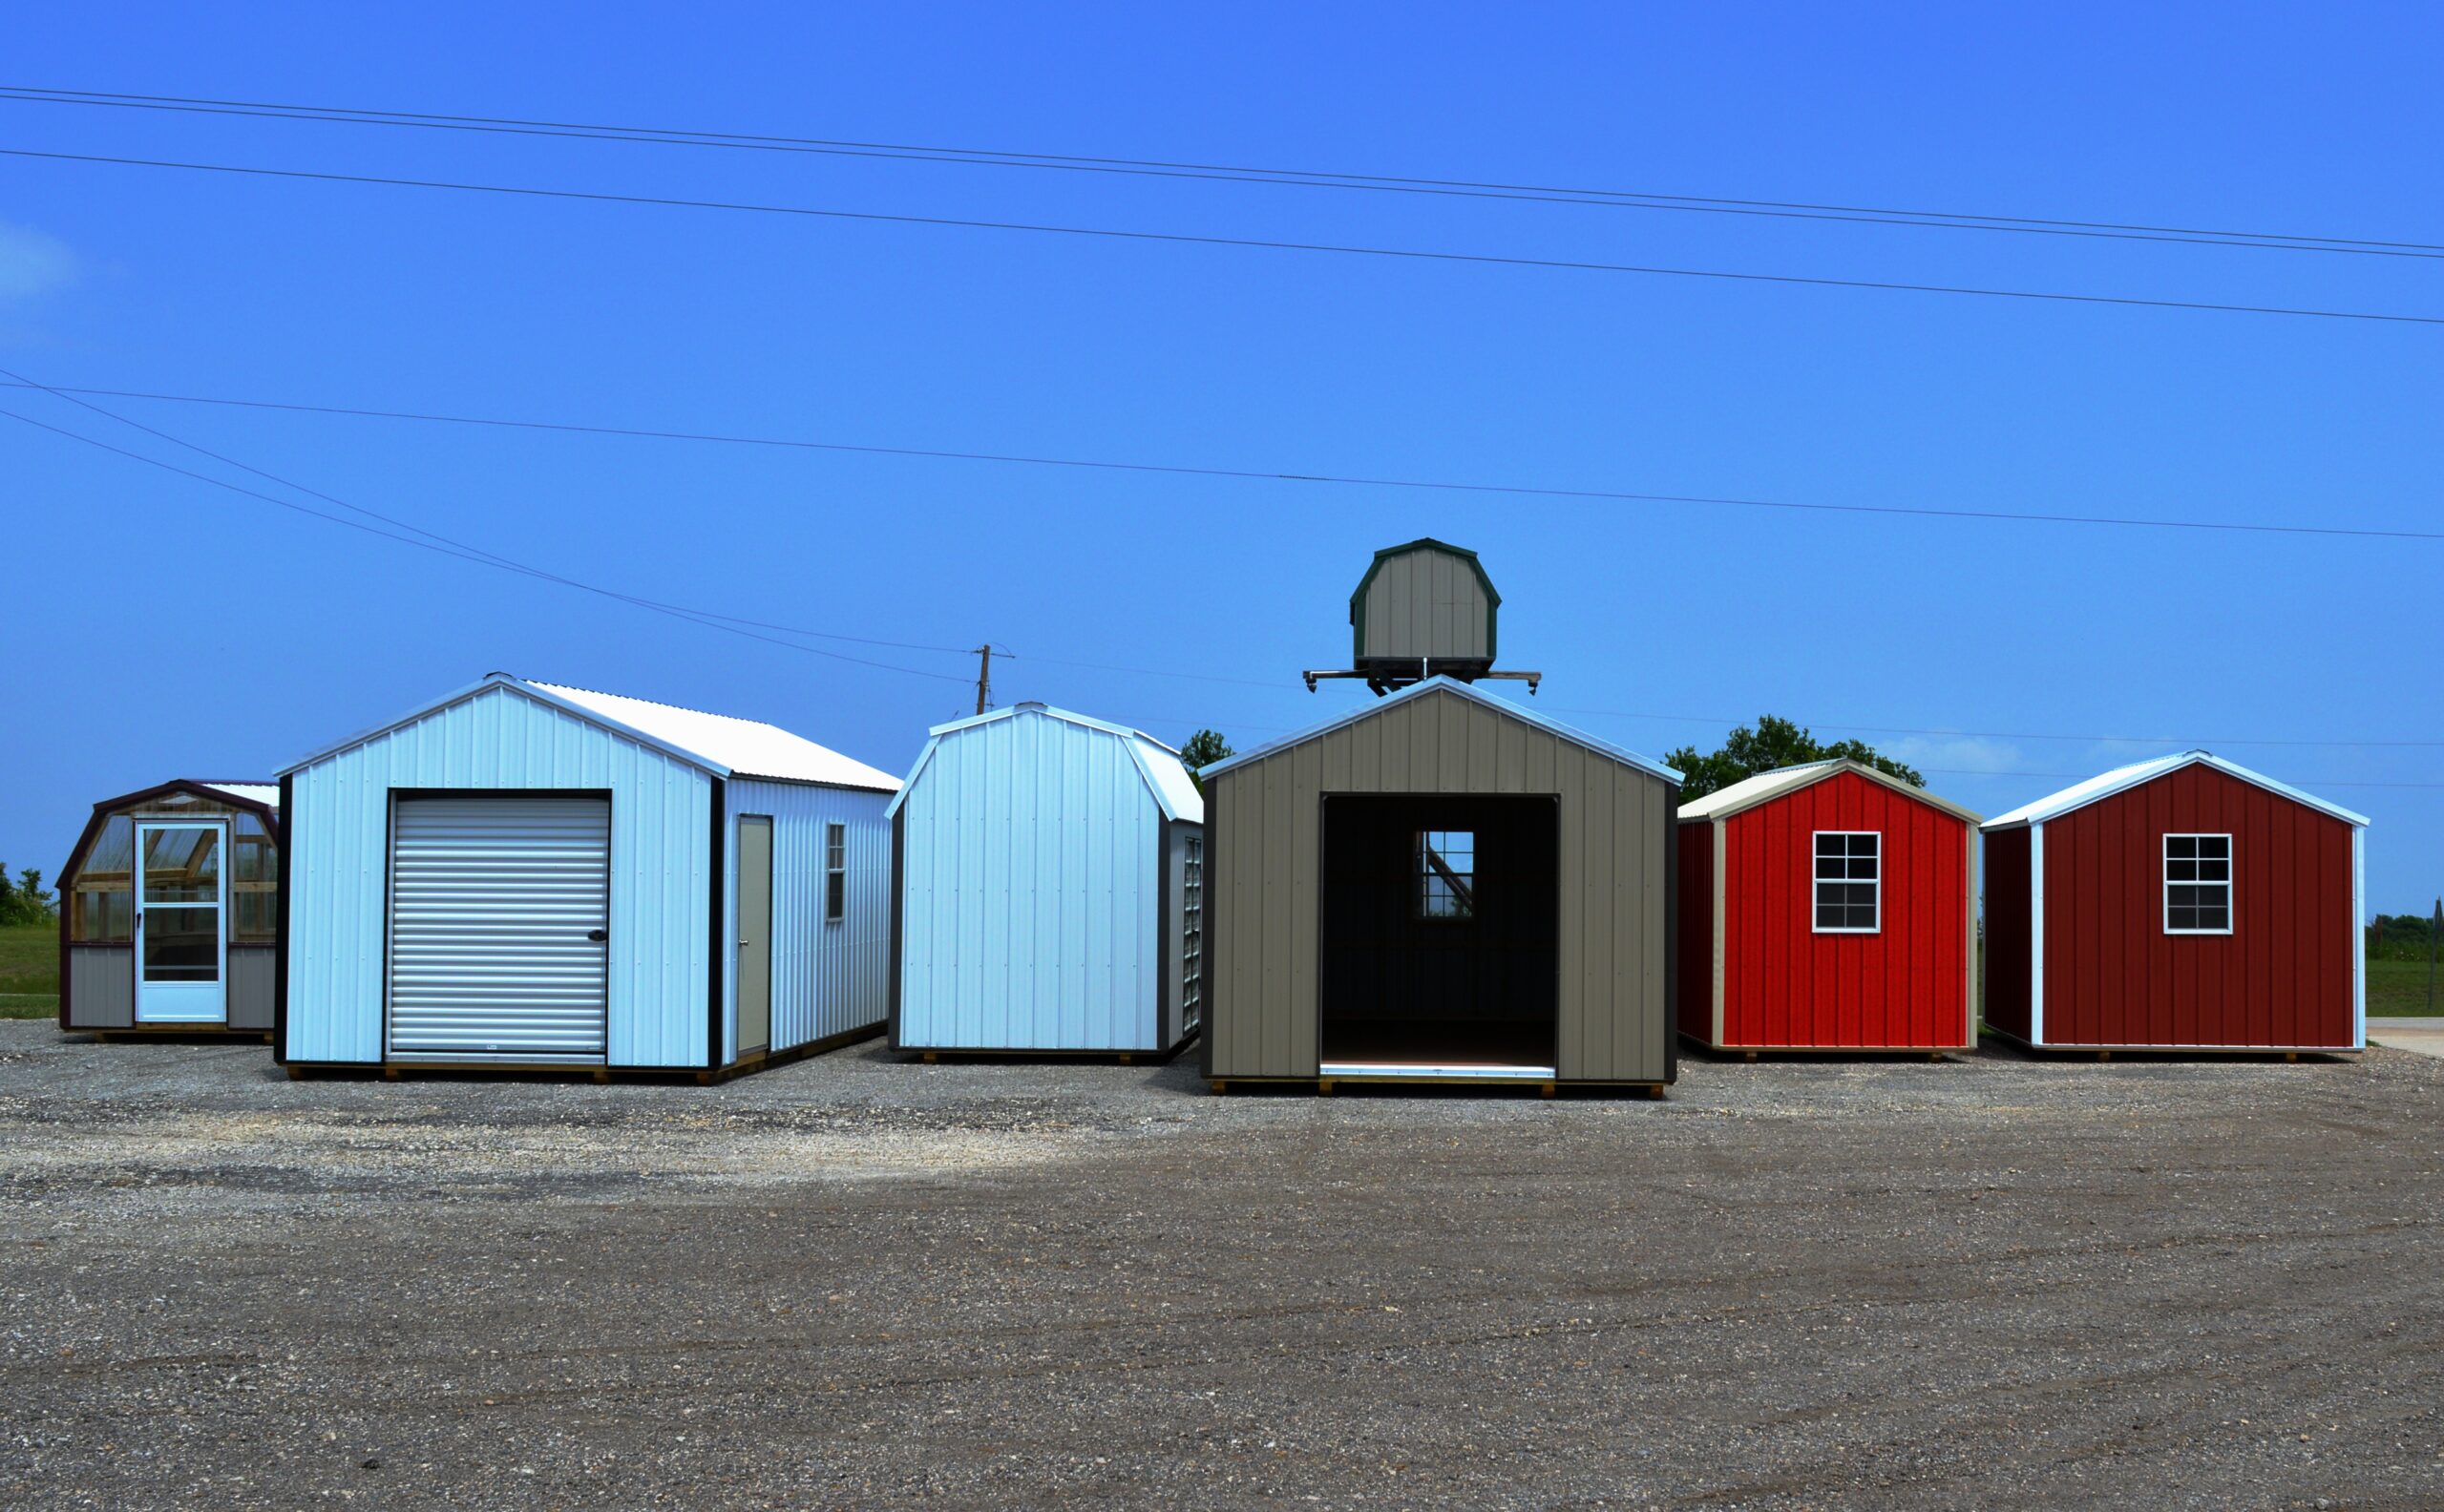 Variety of storage sheds for hunting camp use.